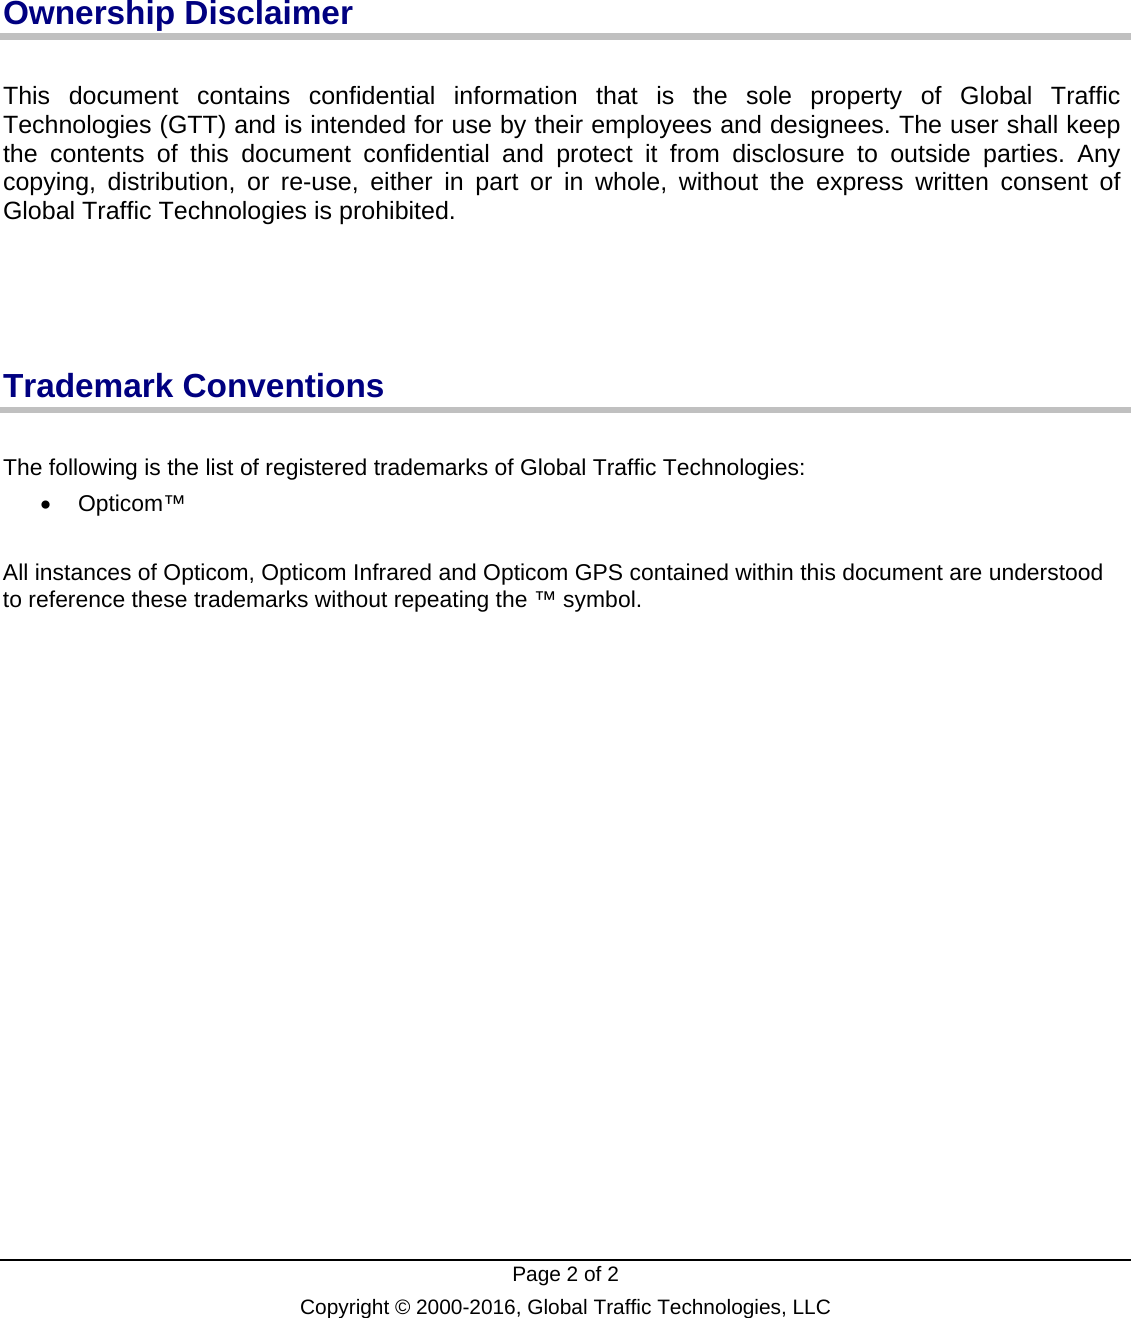   Page 2 of 2 Copyright © 2000-2016, Global Traffic Technologies, LLC    Ownership Disclaimer  This document contains confidential information that is the sole property of Global Traffic Technologies (GTT) and is intended for use by their employees and designees. The user shall keep the contents of this document confidential and protect it from disclosure to outside parties. Any copying, distribution, or re-use, either in part or in whole, without the express written consent of Global Traffic Technologies is prohibited.     Trademark Conventions  The following is the list of registered trademarks of Global Traffic Technologies:  Opticom™  All instances of Opticom, Opticom Infrared and Opticom GPS contained within this document are understood to reference these trademarks without repeating the ™ symbol.   